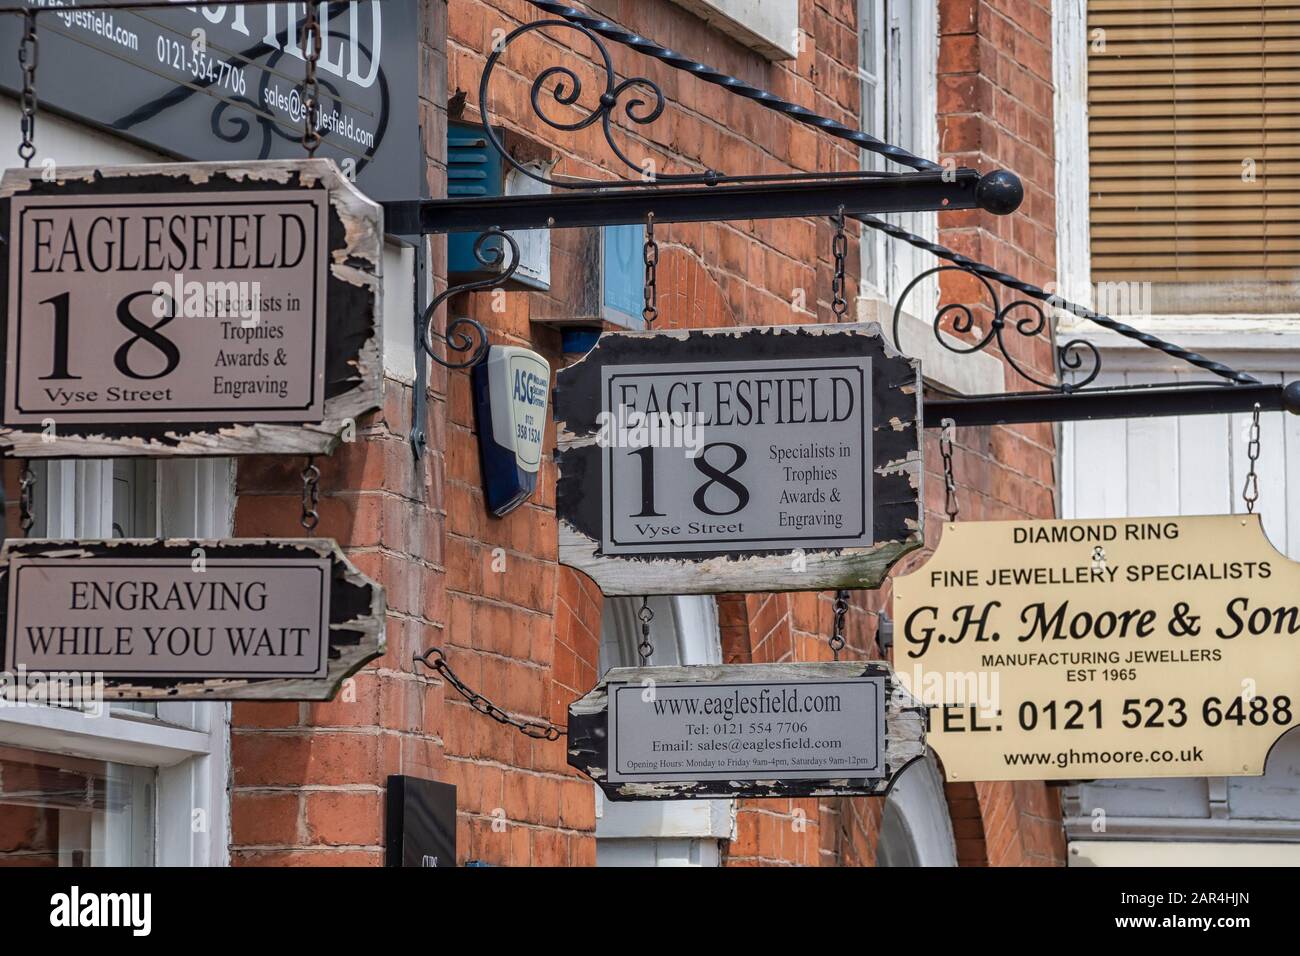 BIRMINGHAM, UK - MAY 28, 2019: Signs for Jewellery shops in Vyse Street in the Jewellery Quarter Stock Photo